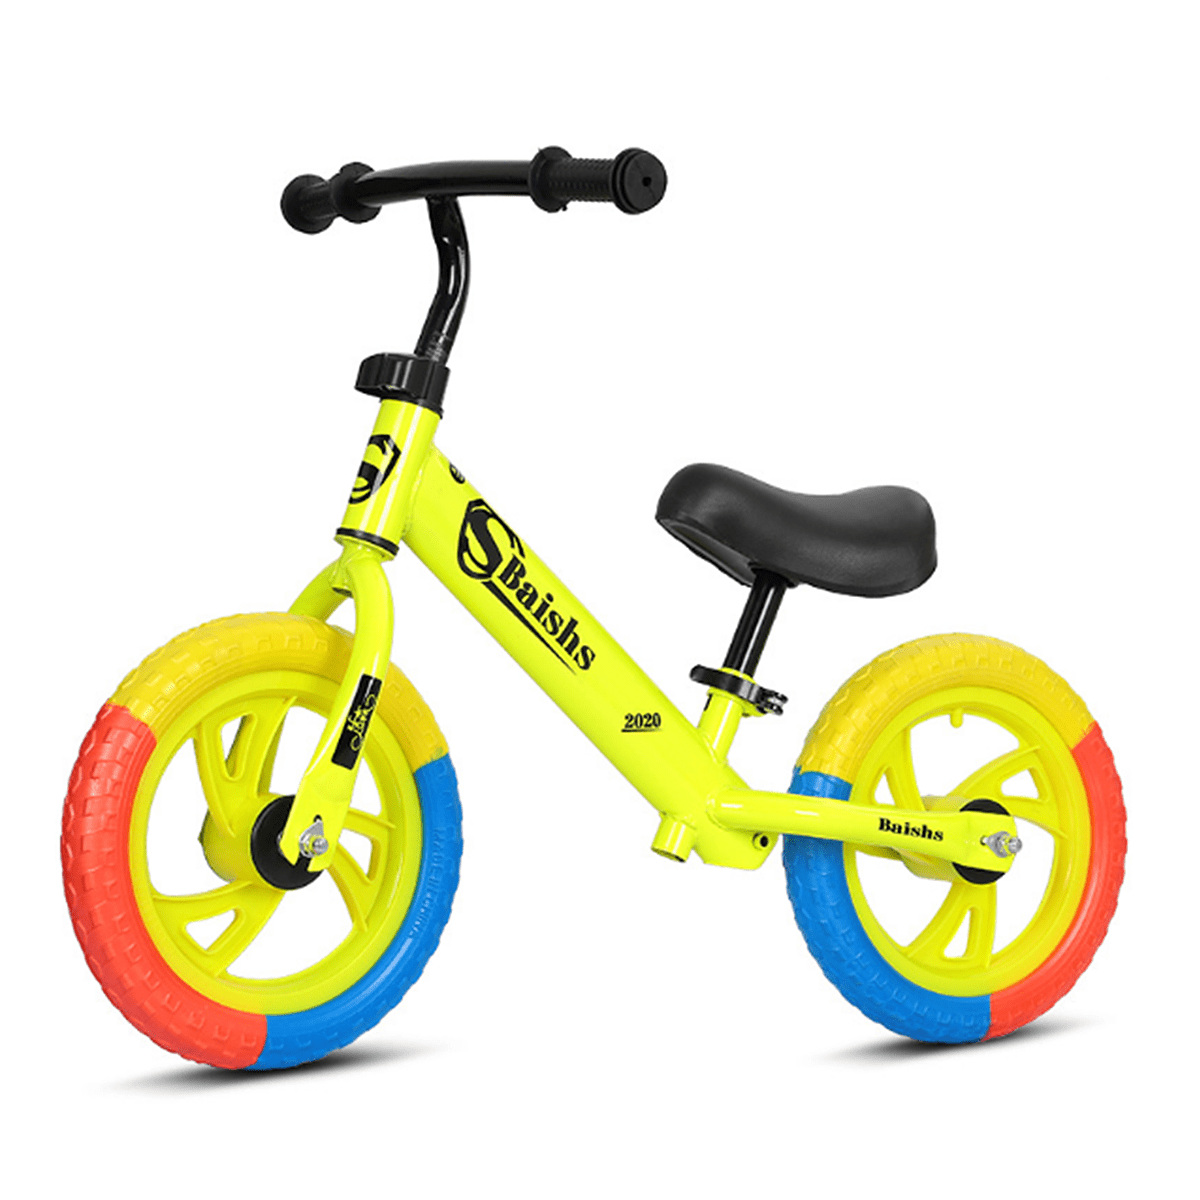 12 Balance Bike for 2-6 Years Old Kids Toddlers Boys Girls Lightweight Training Bicycle Aluminum Alloy Frame No Pedal Walking Ride on Toys With Adjustable Handlebar & Seat 